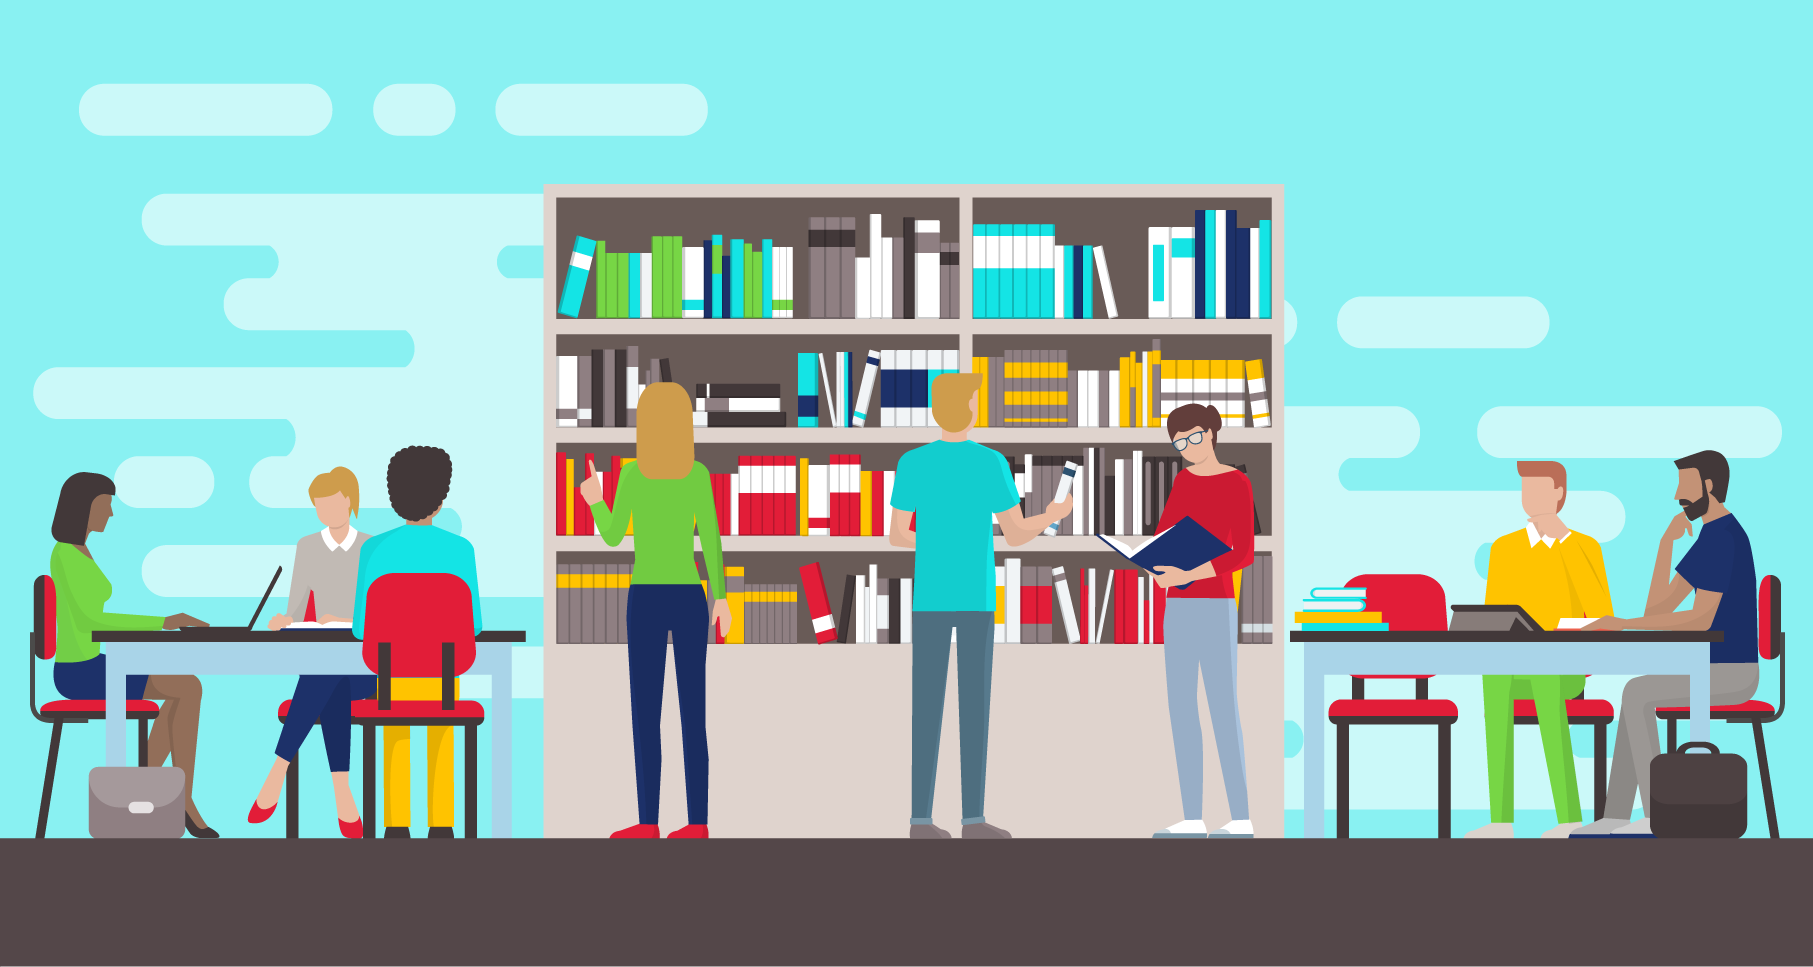 People sitting around table and standing in front of bookshelf